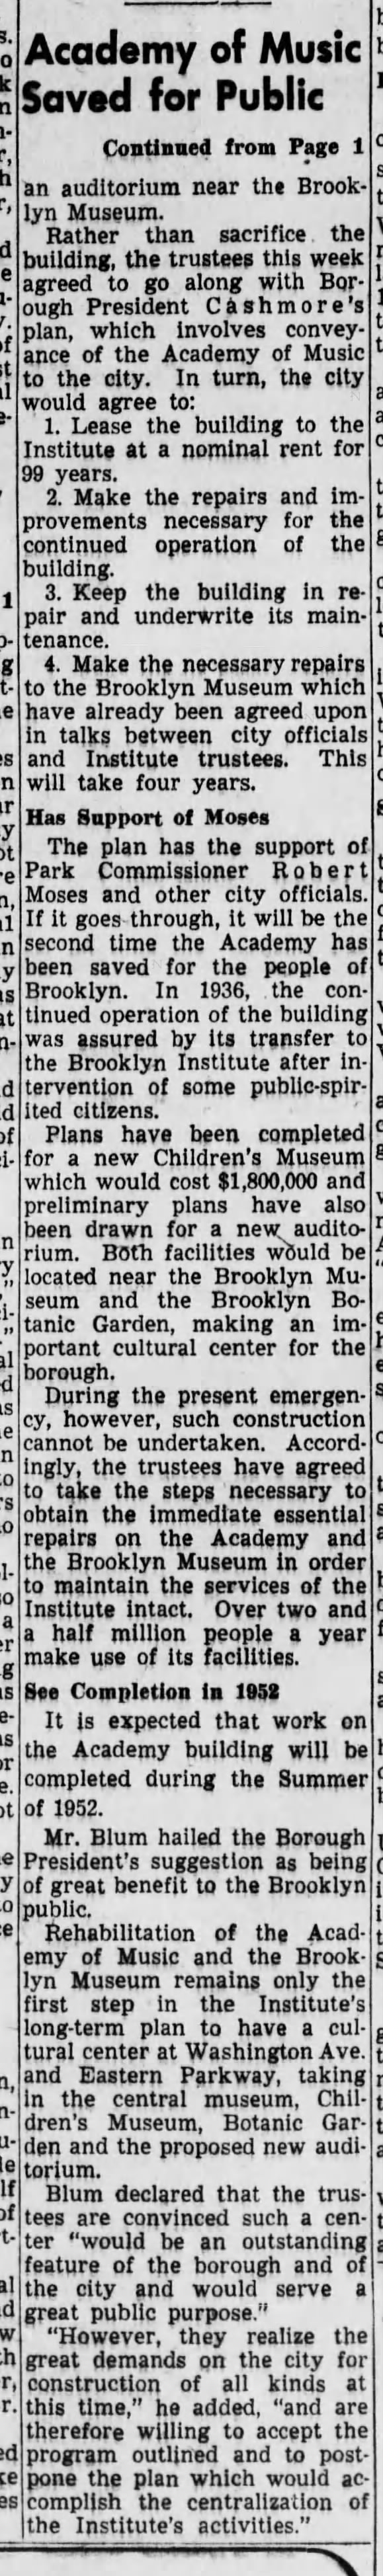 Academy of music saved for public_1951